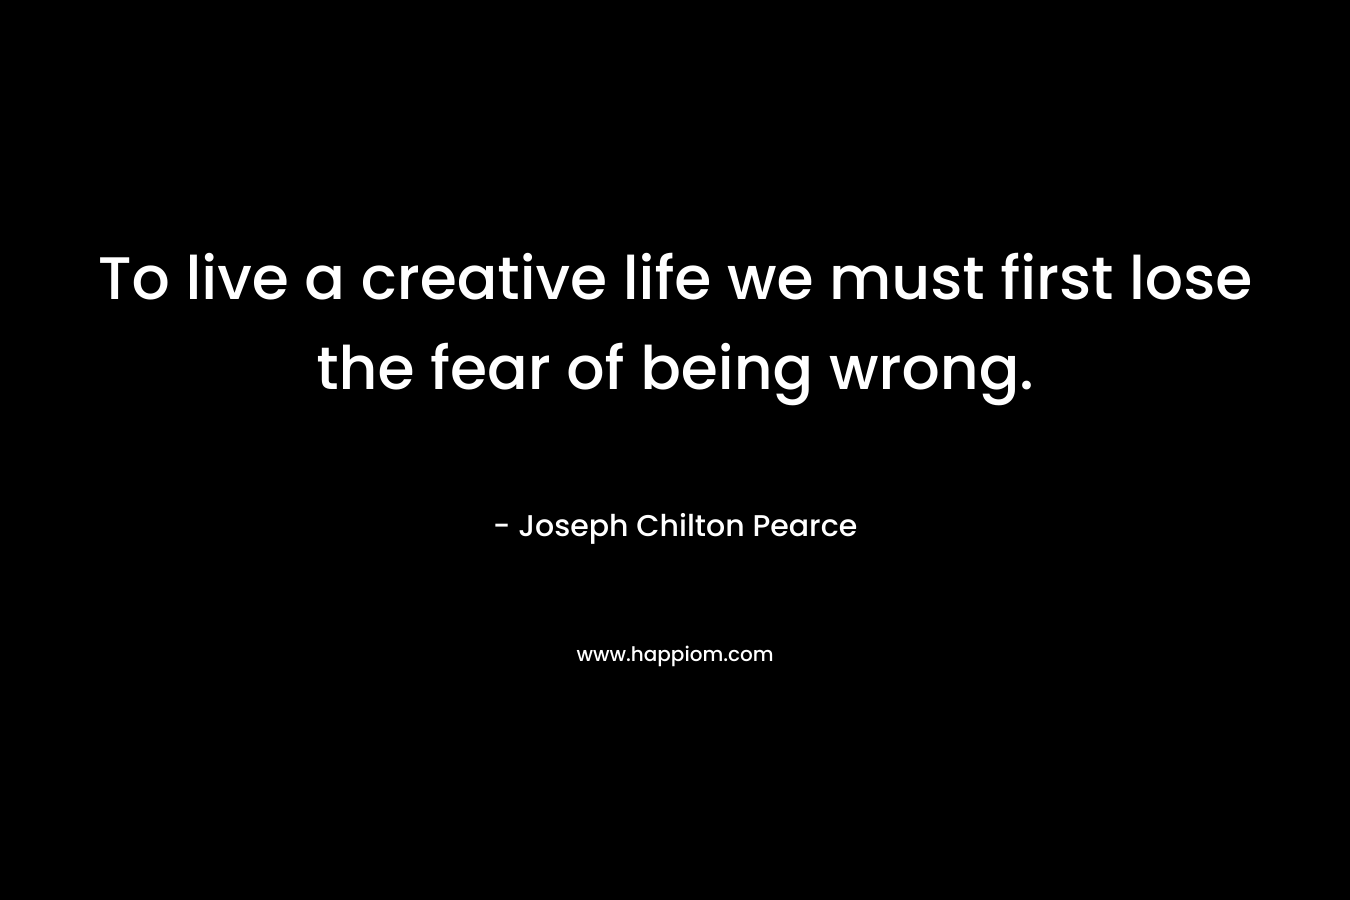 To live a creative life we must first lose the fear of being wrong. – Joseph Chilton Pearce